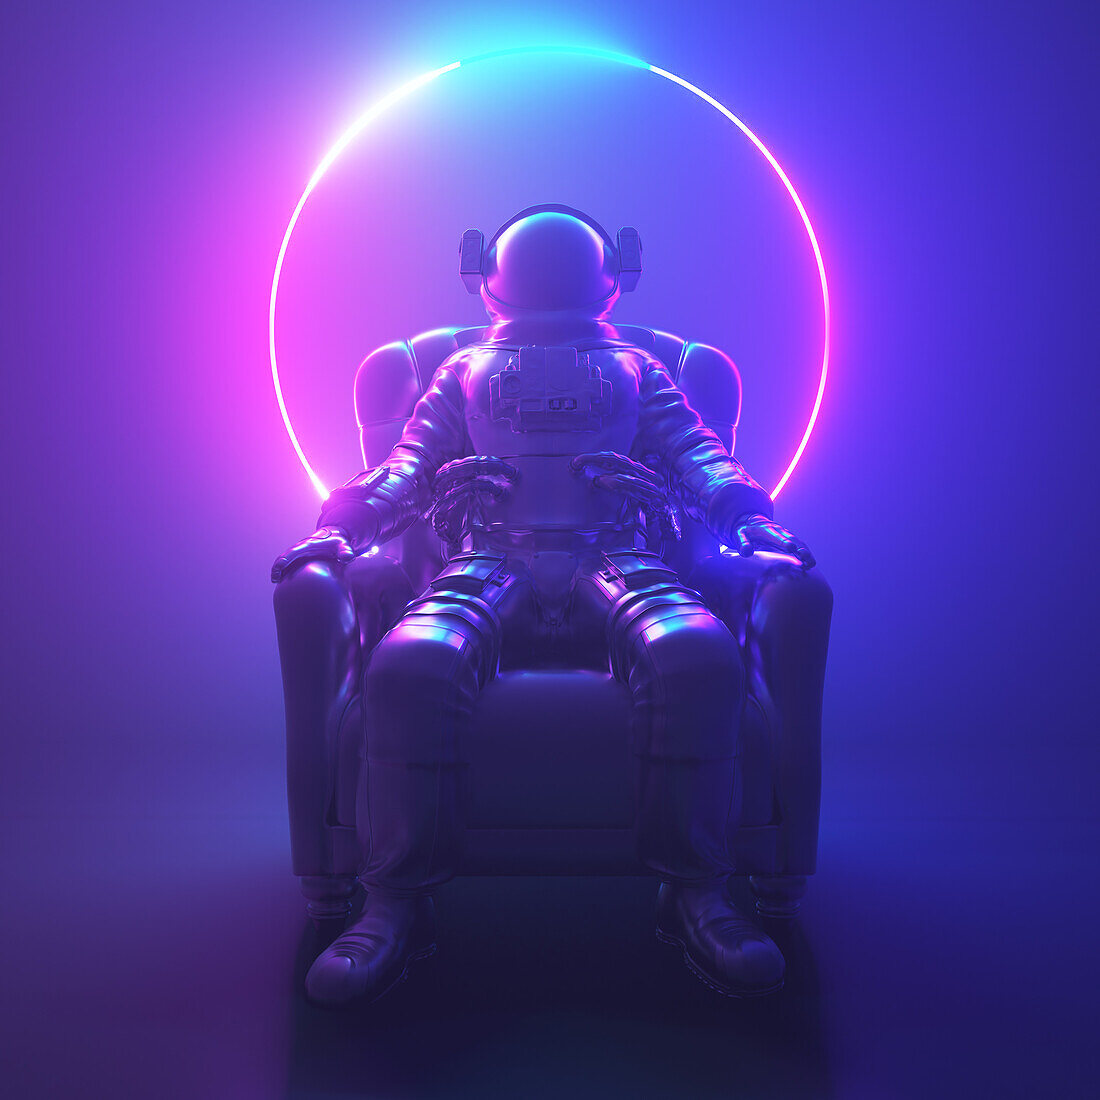 Astronaut sitting in a chair, illustration